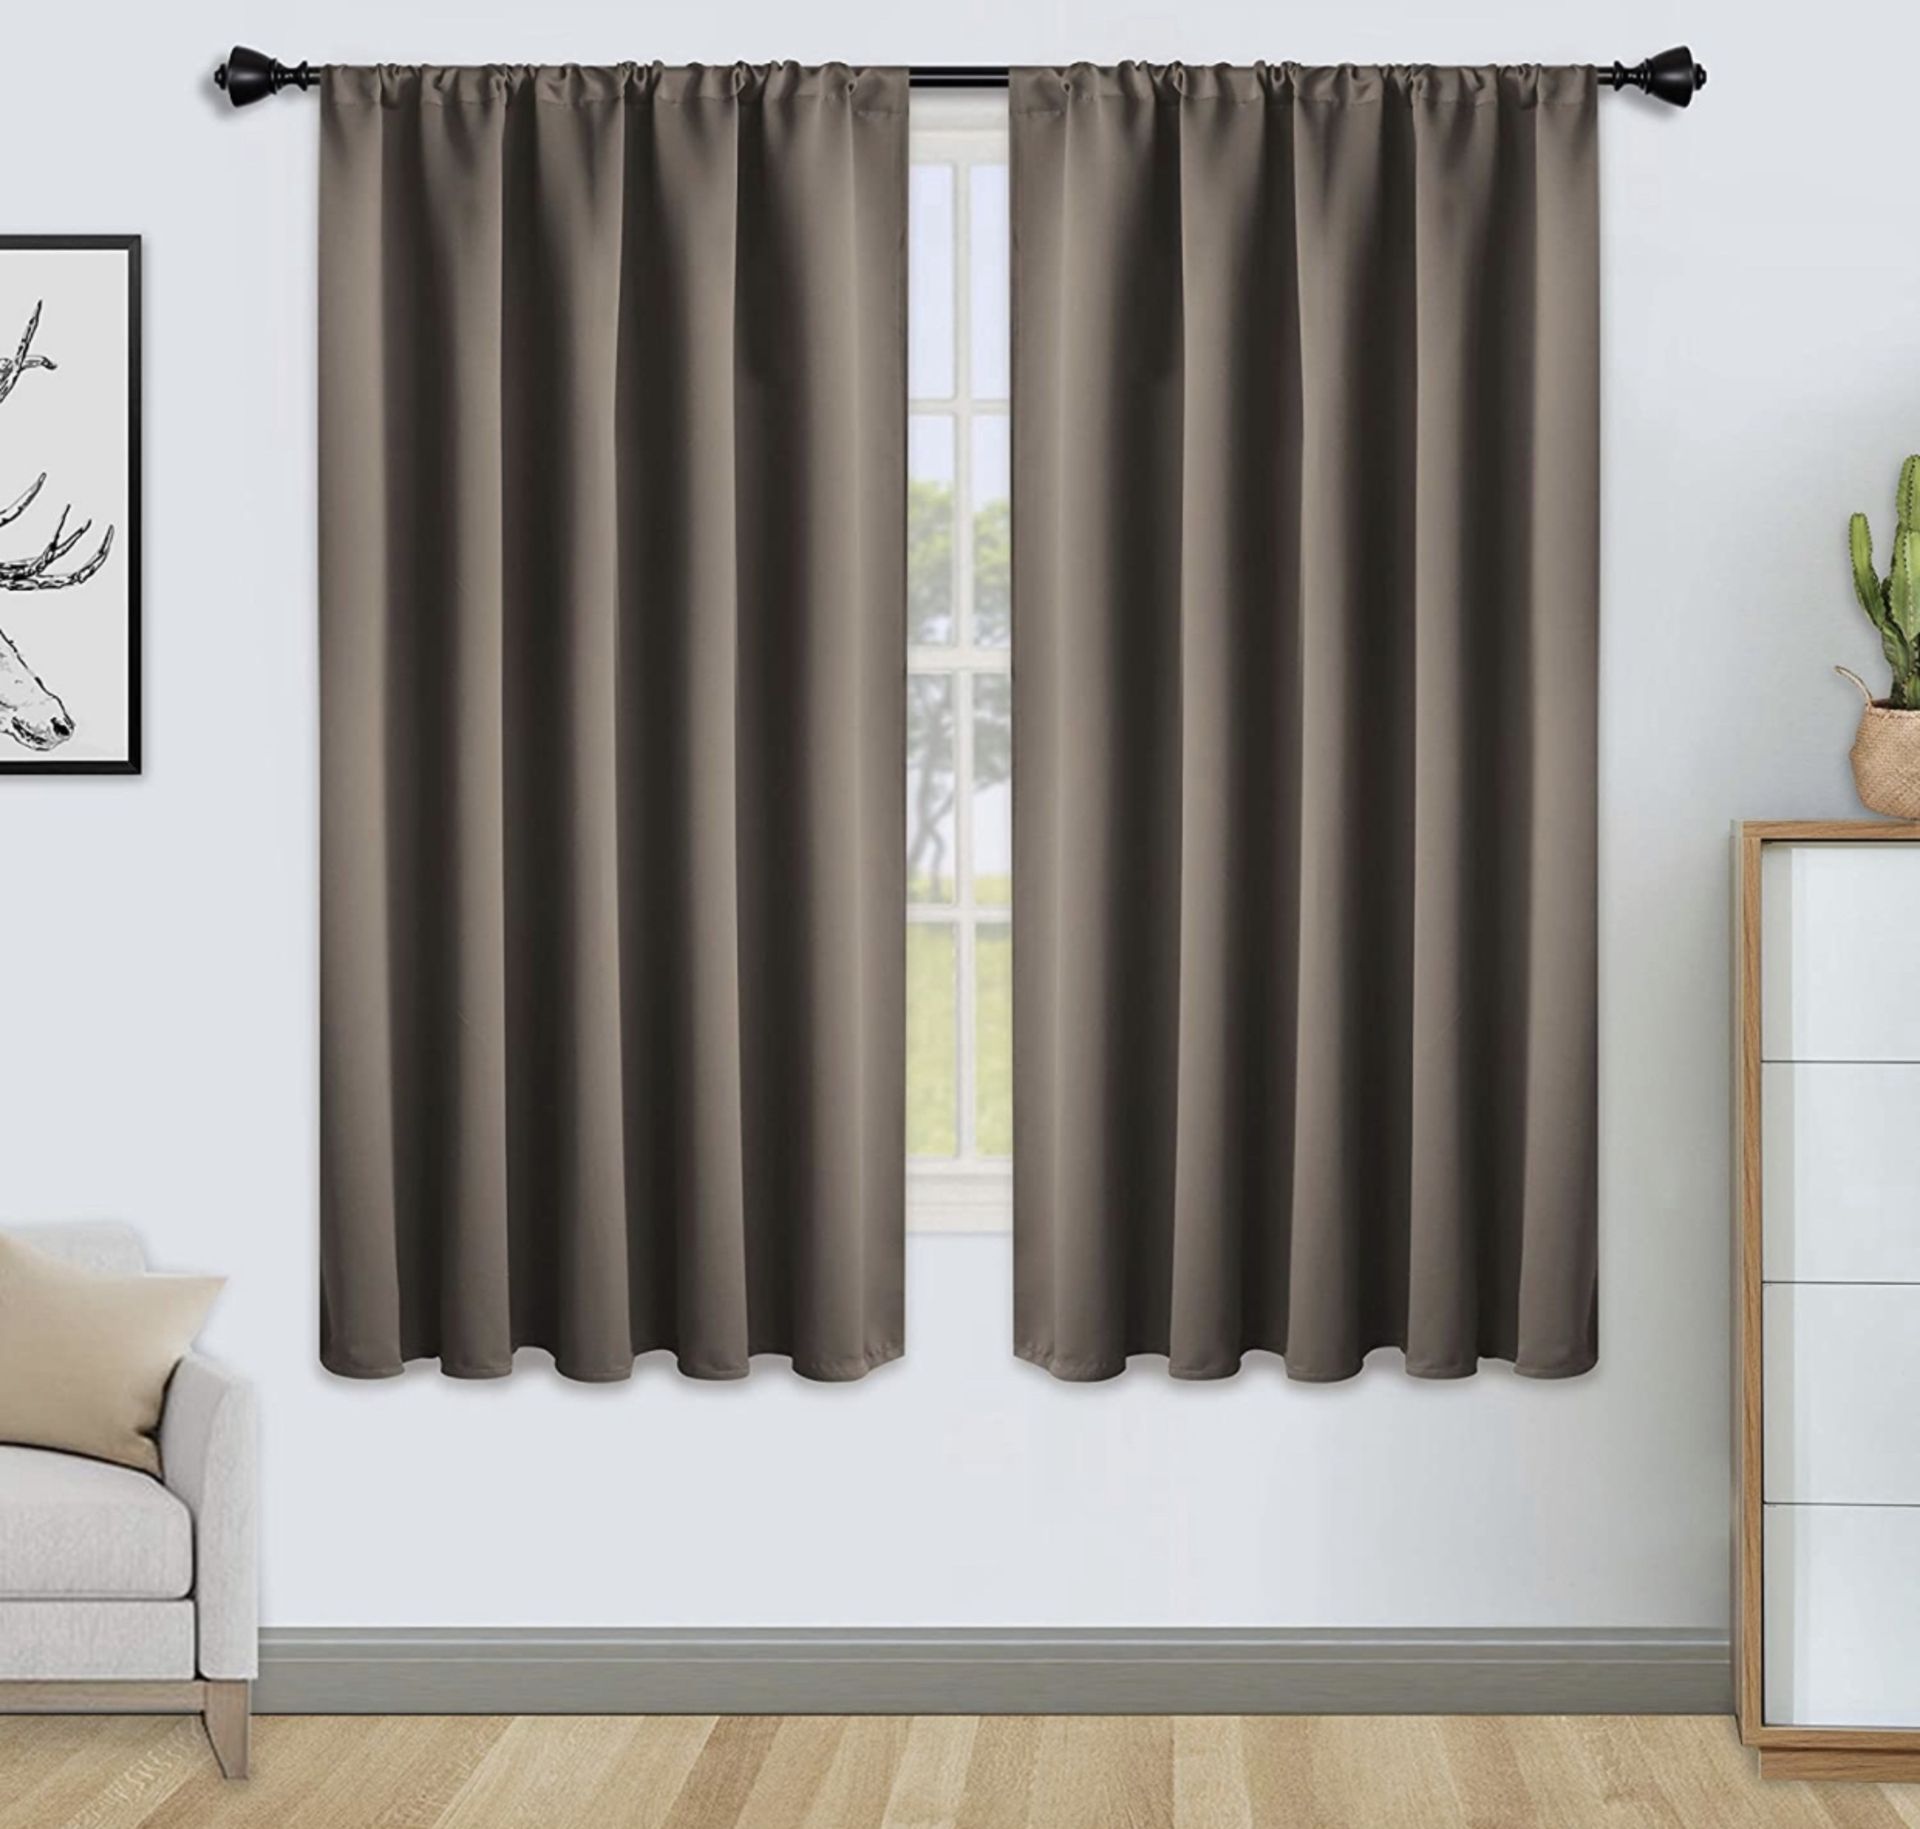 RRP £30.99 Floweroom Blackout Curtains Thermal Insulated Rod Pocket Curtains, 168cm x 137cm